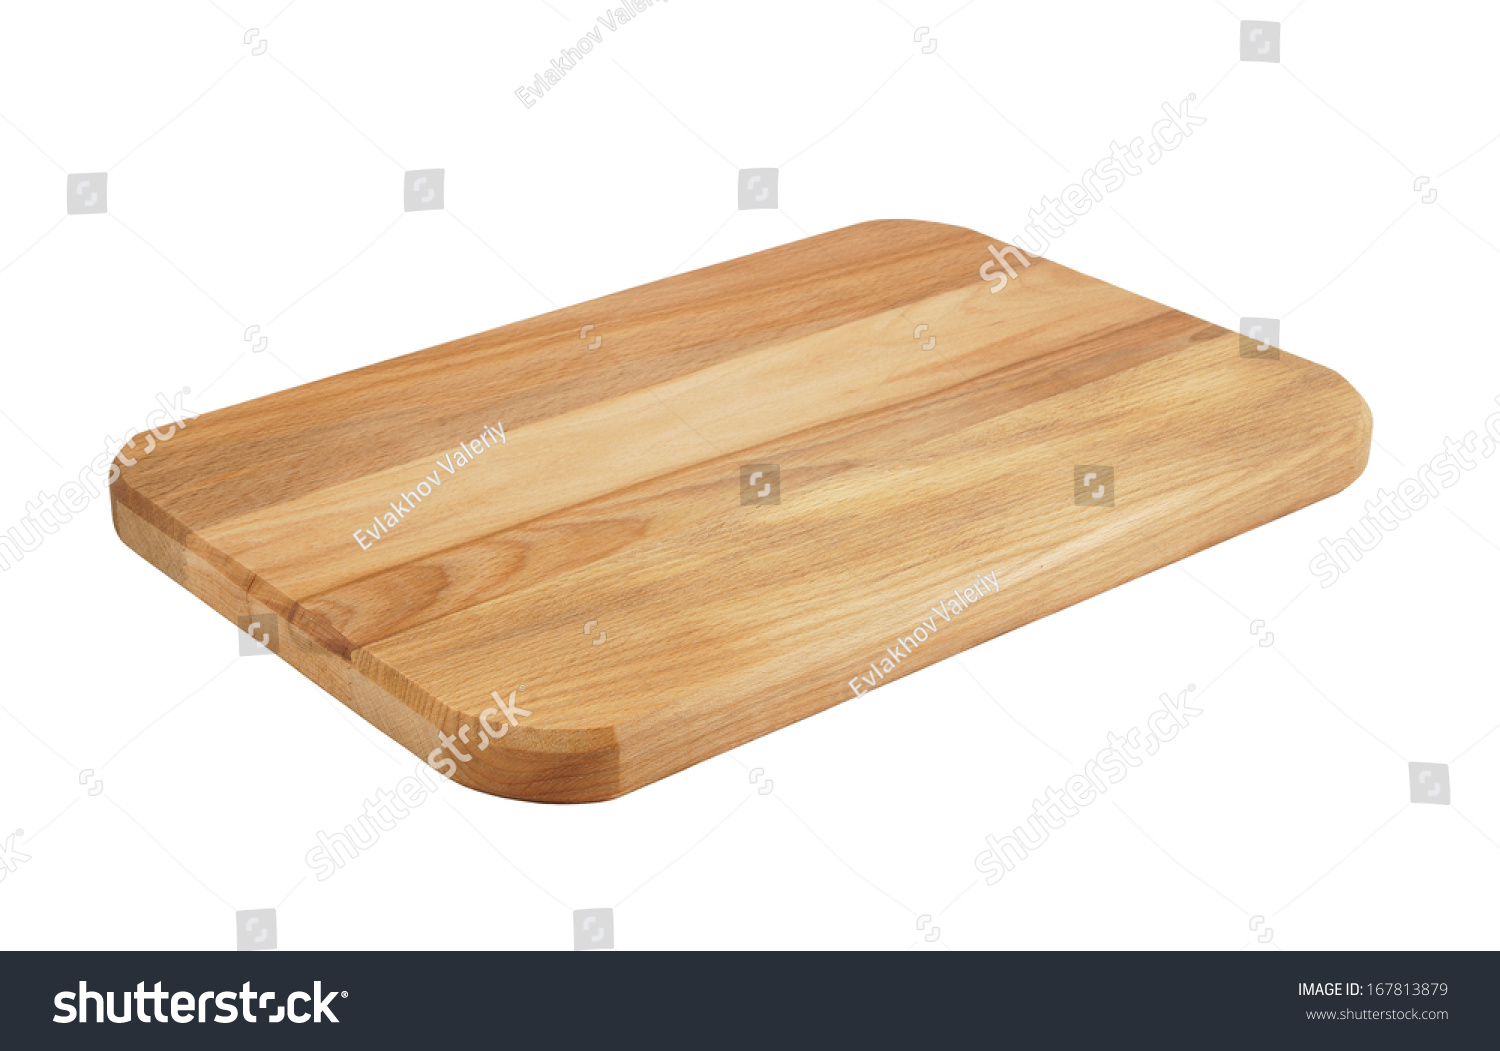 Cutting board isolated on white background  #167813879